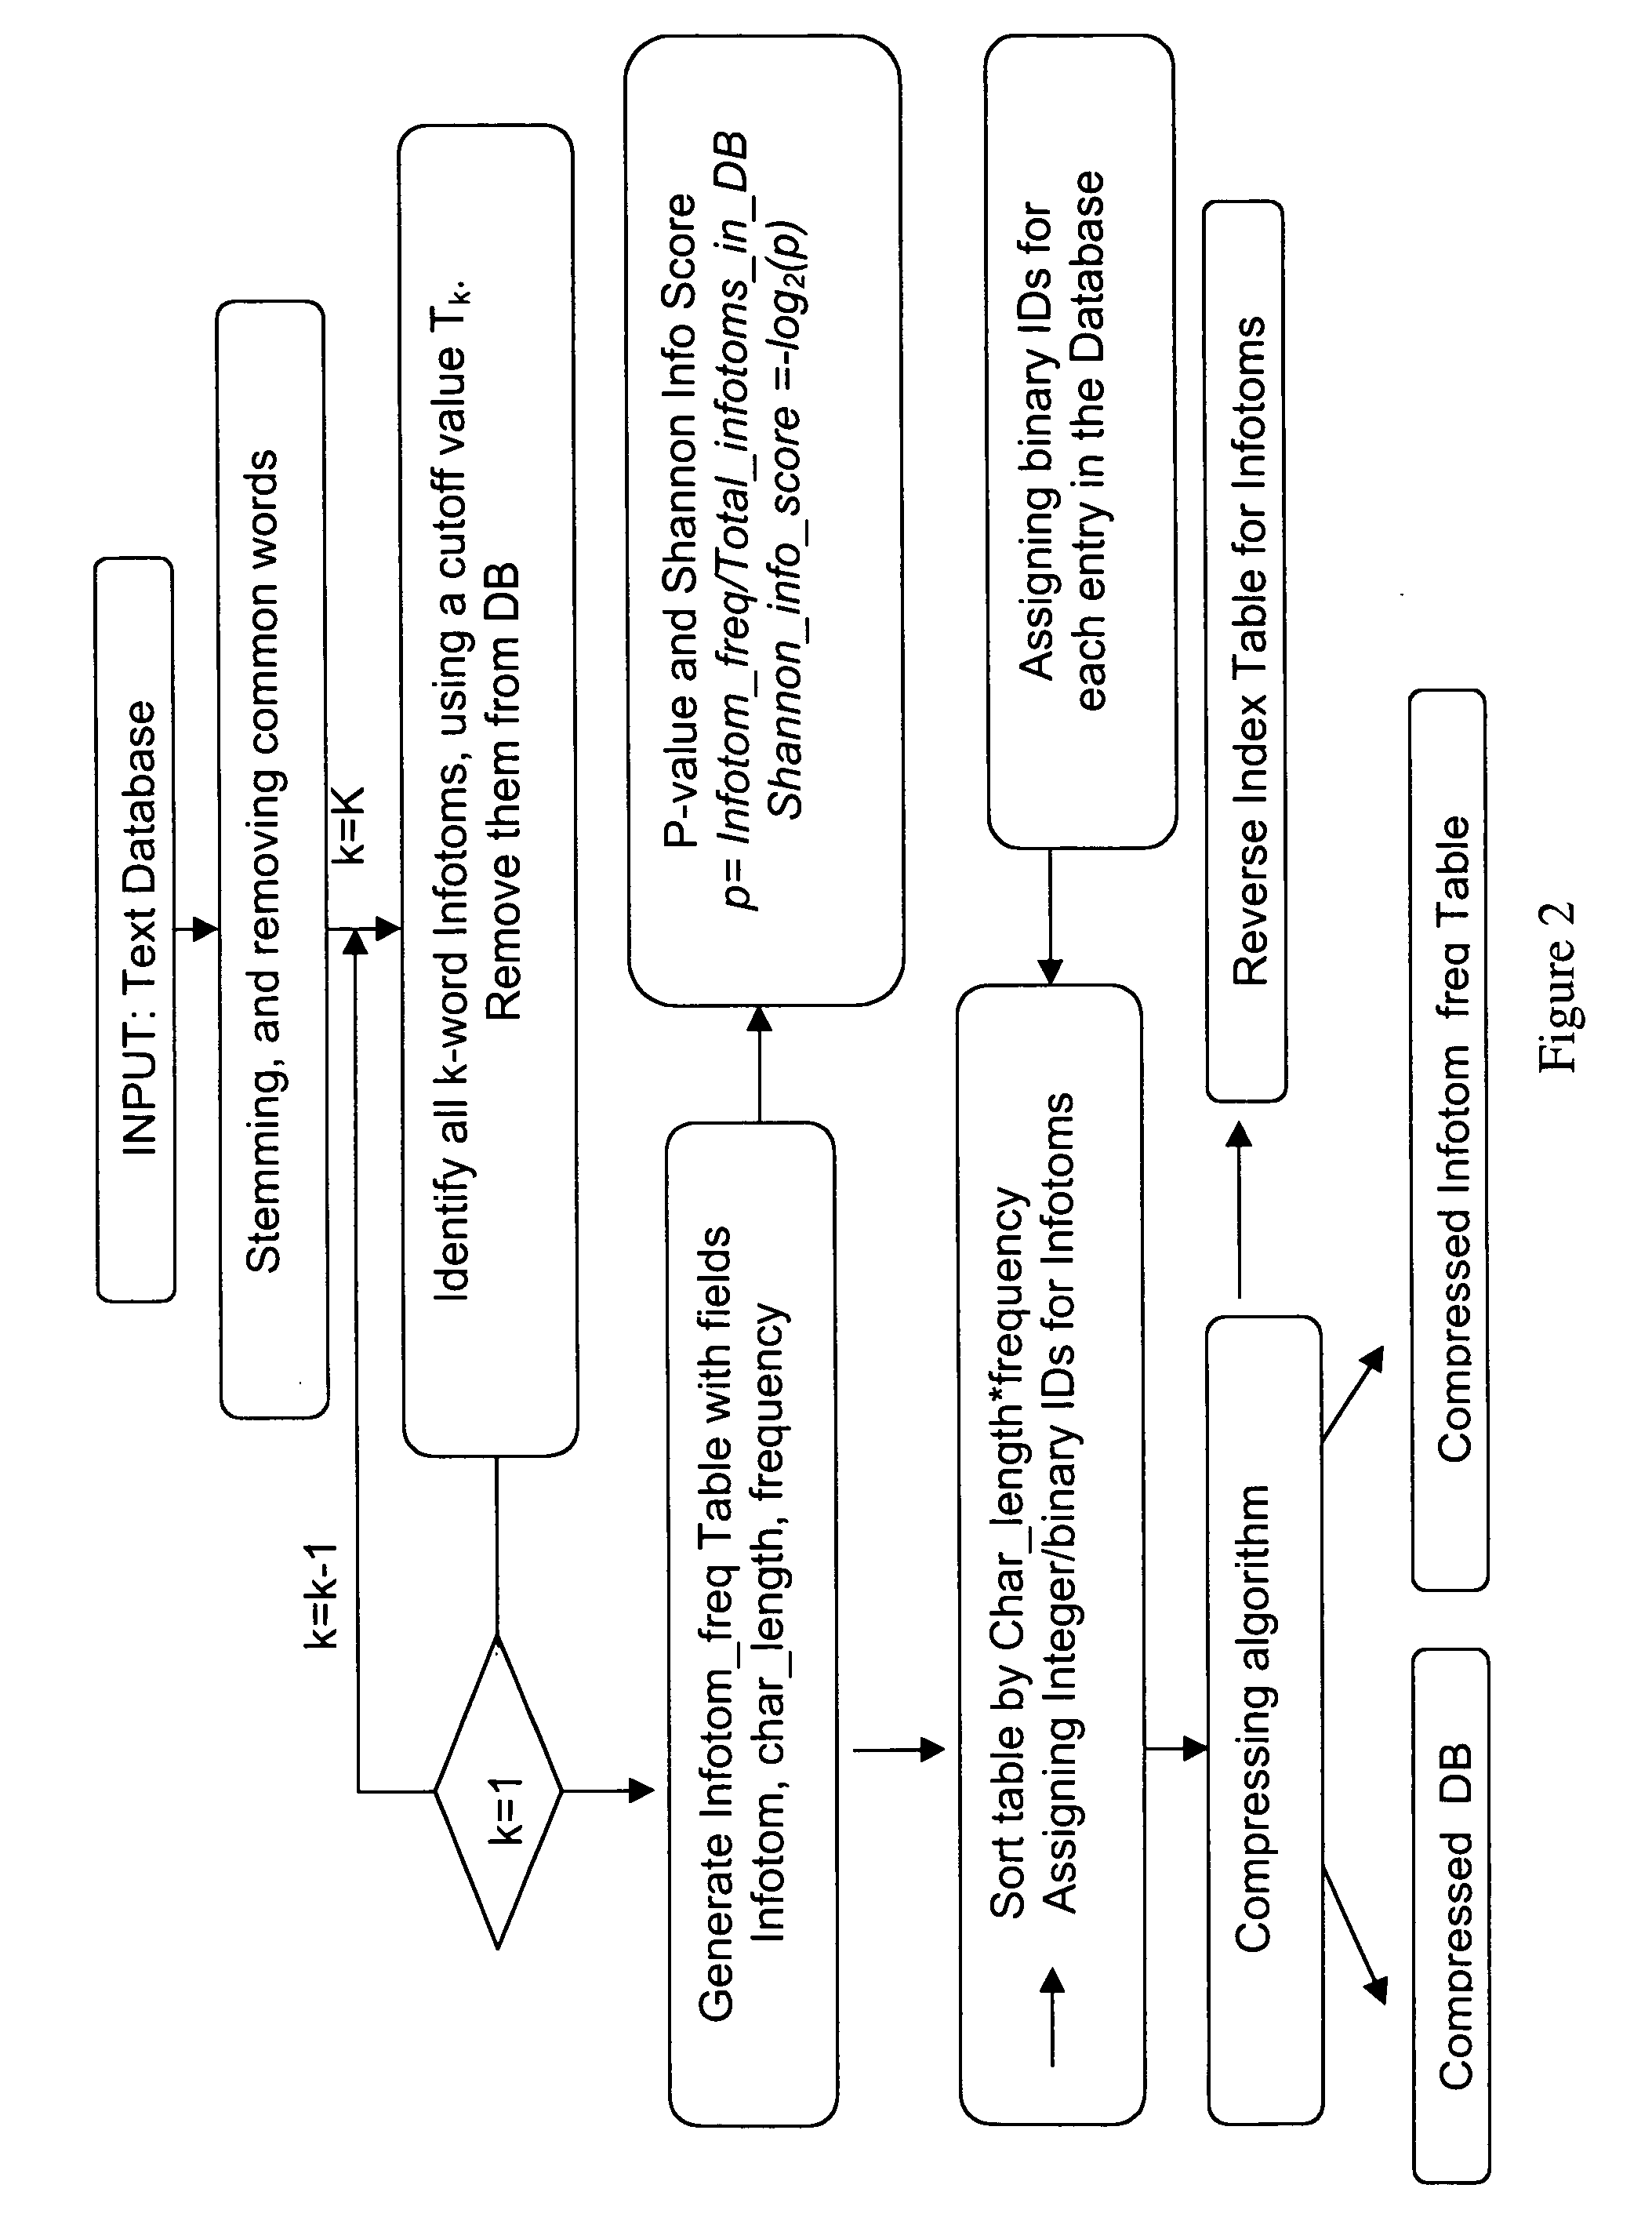 Full text query and search systems and methods of use